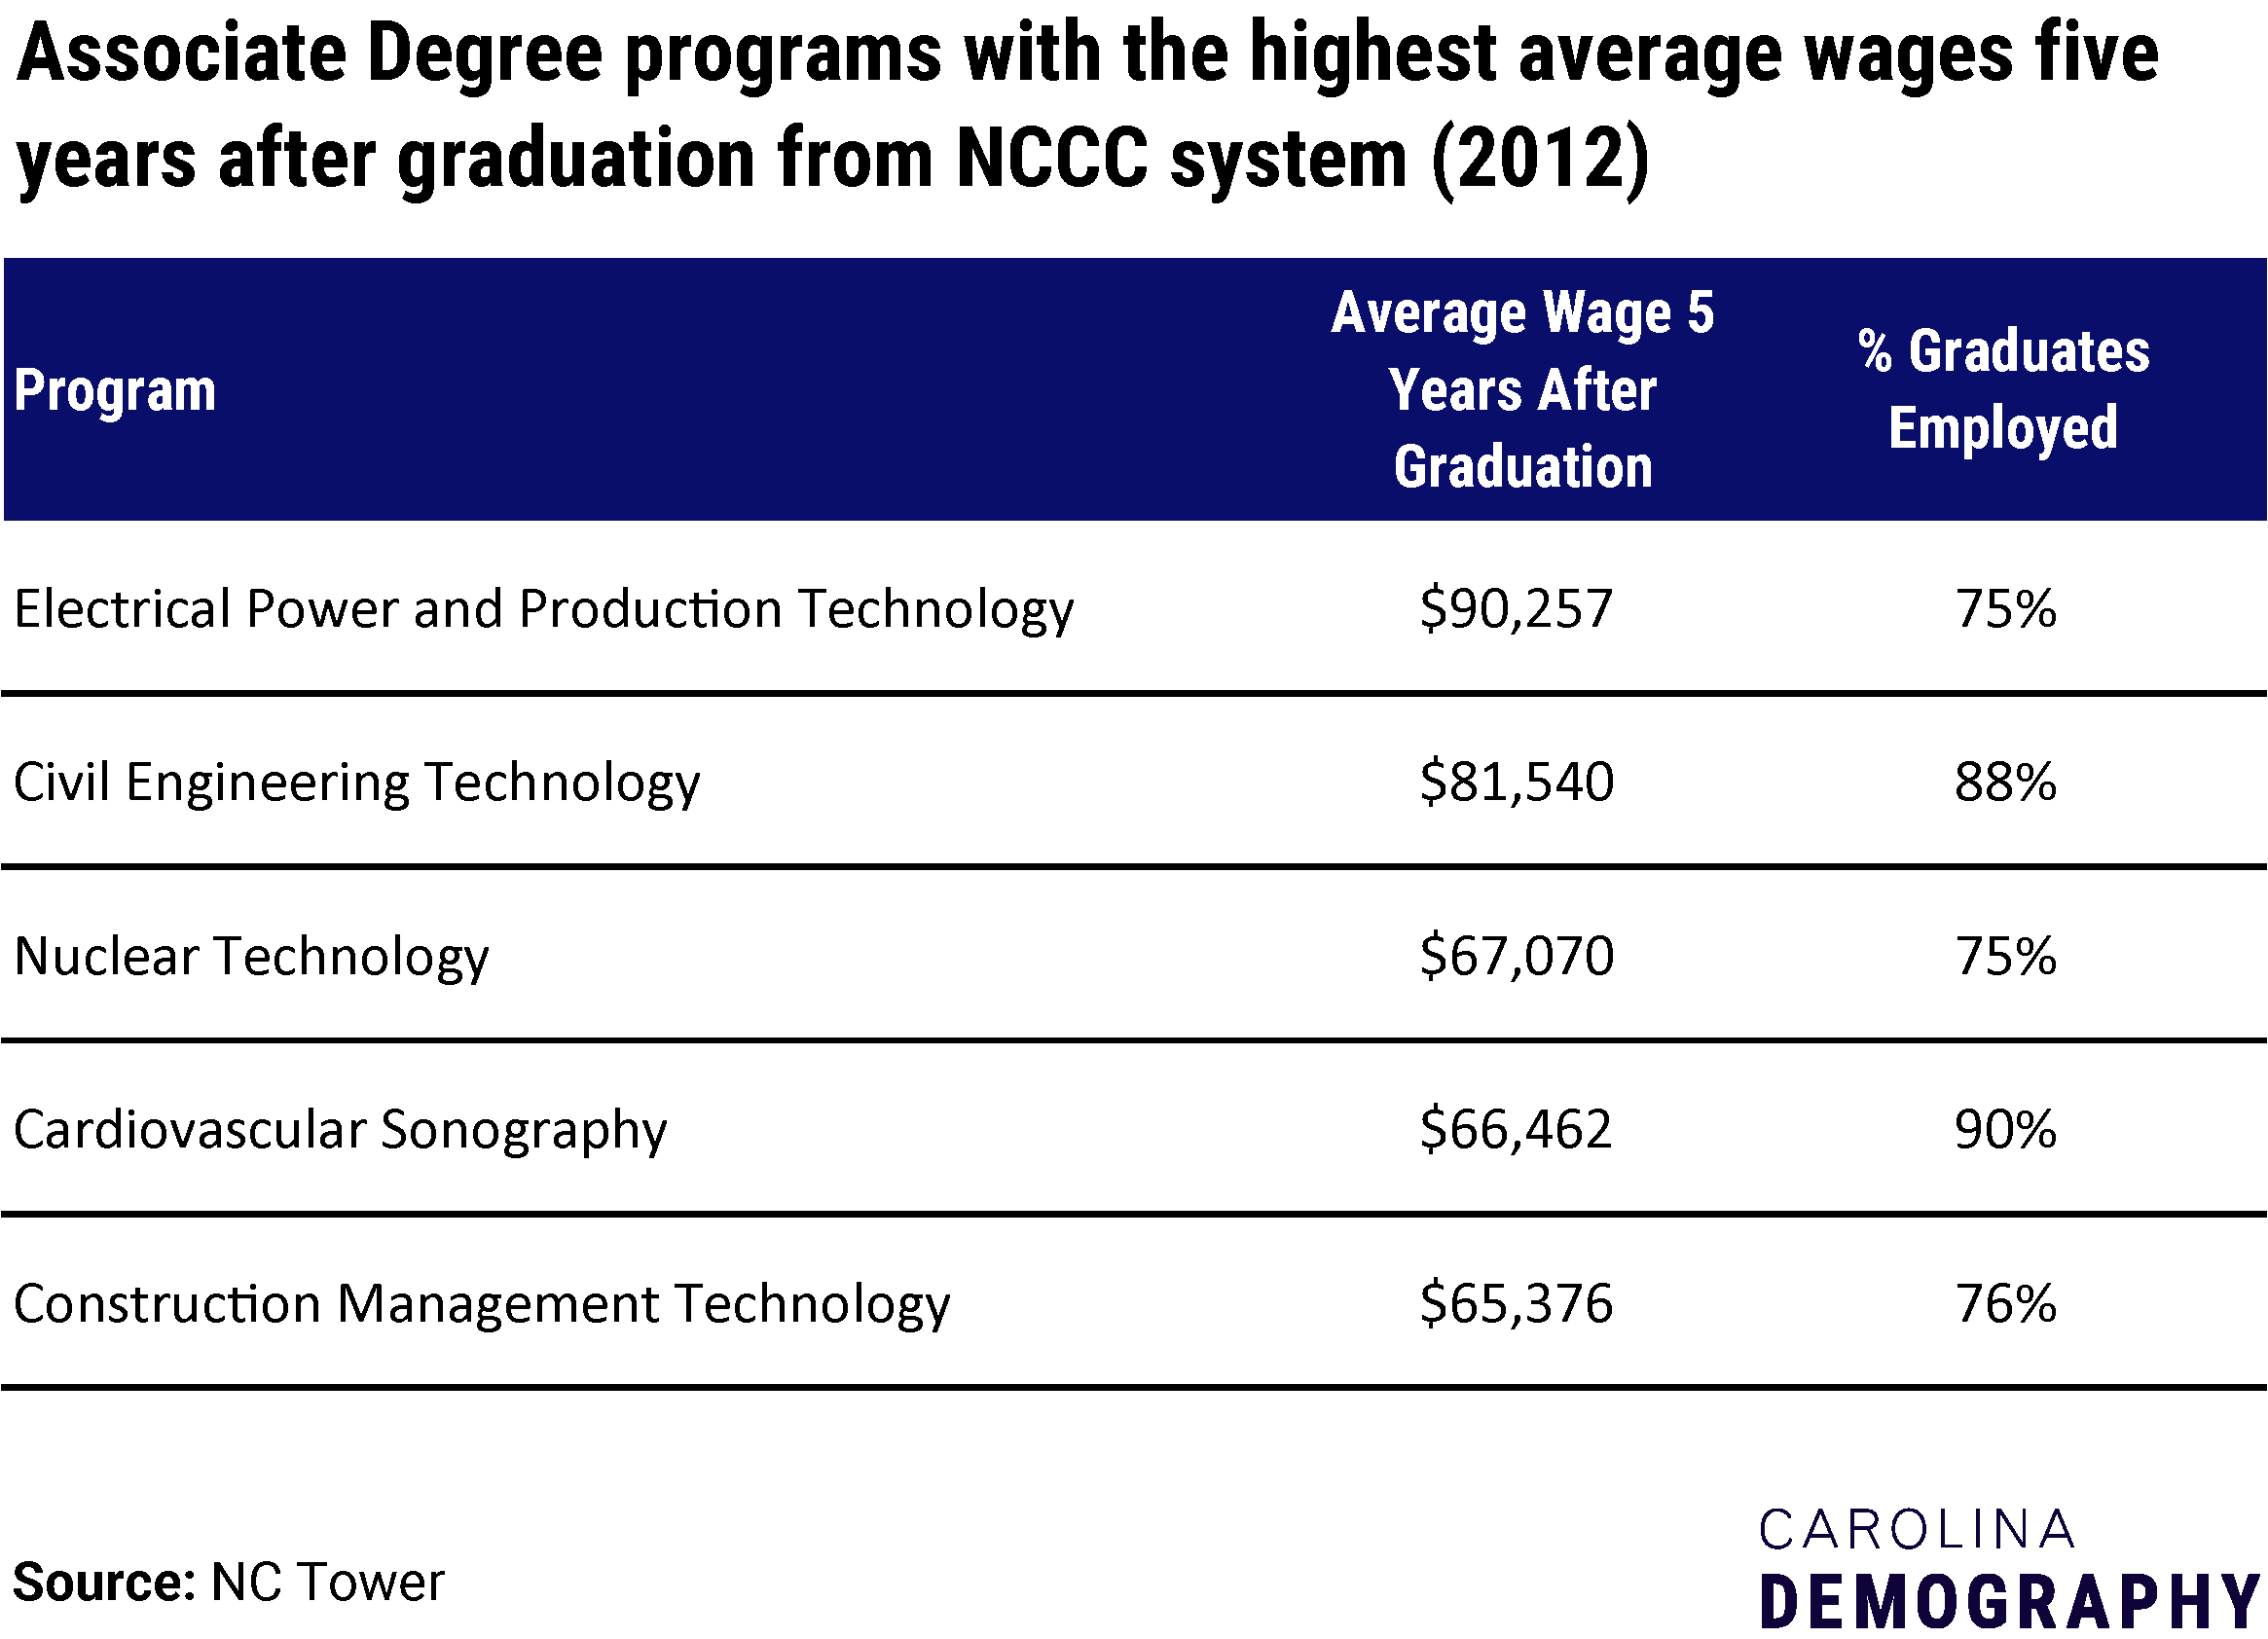 Associate degree program graduates with the highest average wages five years after graduation, NCCC system schools (2012)